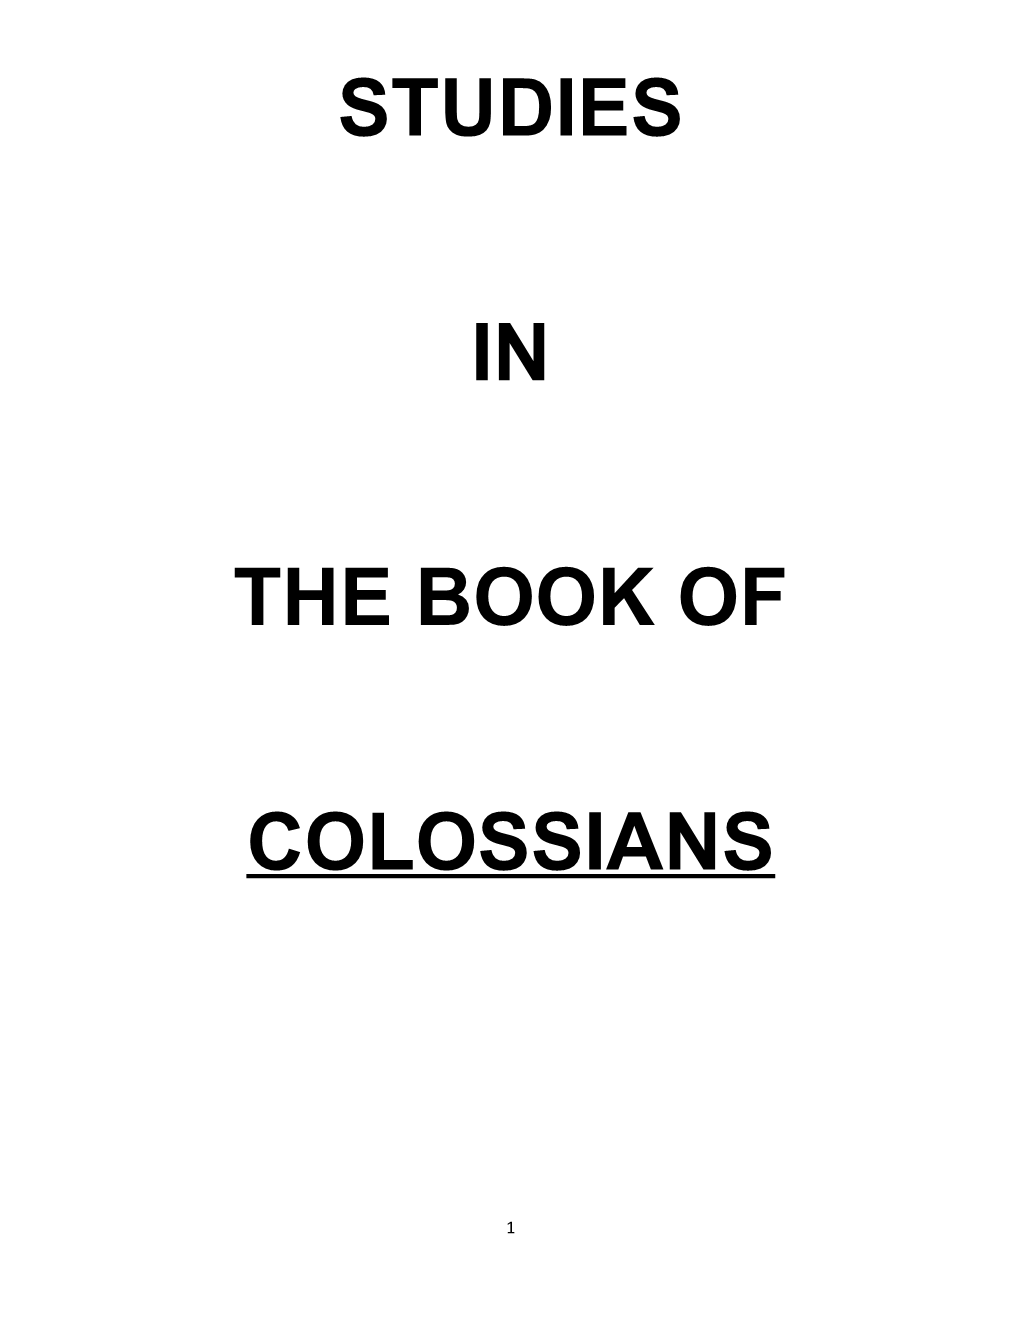 Introduction to the Book of Colossians